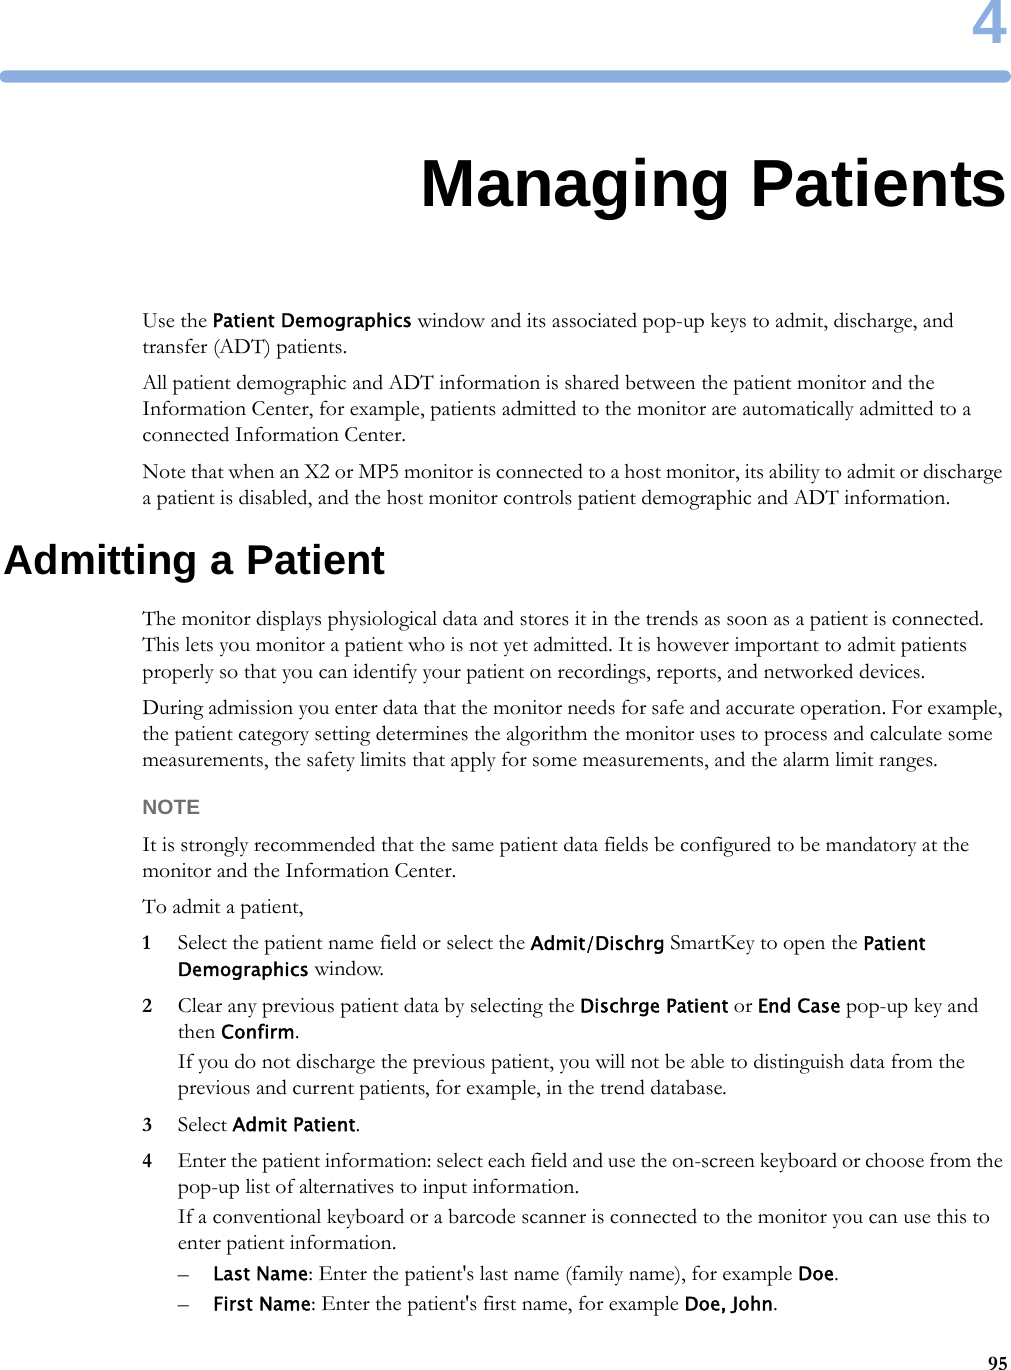 4954Managing PatientsUse the Patient Demographics window and its associated pop-up keys to admit, discharge, and transfer (ADT) patients.All patient demographic and ADT information is shared between the patient monitor and the Information Center, for example, patients admitted to the monitor are automatically admitted to a connected Information Center.Note that when an X2 or MP5 monitor is connected to a host monitor, its ability to admit or discharge a patient is disabled, and the host monitor controls patient demographic and ADT information.Admitting a PatientThe monitor displays physiological data and stores it in the trends as soon as a patient is connected. This lets you monitor a patient who is not yet admitted. It is however important to admit patients properly so that you can identify your patient on recordings, reports, and networked devices.During admission you enter data that the monitor needs for safe and accurate operation. For example, the patient category setting determines the algorithm the monitor uses to process and calculate some measurements, the safety limits that apply for some measurements, and the alarm limit ranges.NOTEIt is strongly recommended that the same patient data fields be configured to be mandatory at the monitor and the Information Center.To admit a patient,1Select the patient name field or select the Admit/Dischrg SmartKey to open the Patient Demographics window.2Clear any previous patient data by selecting the Dischrge Patient or End Case pop-up key and then Confirm.If you do not discharge the previous patient, you will not be able to distinguish data from the previous and current patients, for example, in the trend database.3Select Admit Patient.4Enter the patient information: select each field and use the on-screen keyboard or choose from the pop-up list of alternatives to input information.If a conventional keyboard or a barcode scanner is connected to the monitor you can use this to enter patient information.–Last Name: Enter the patient&apos;s last name (family name), for example Doe.–First Name: Enter the patient&apos;s first name, for example Doe, John.